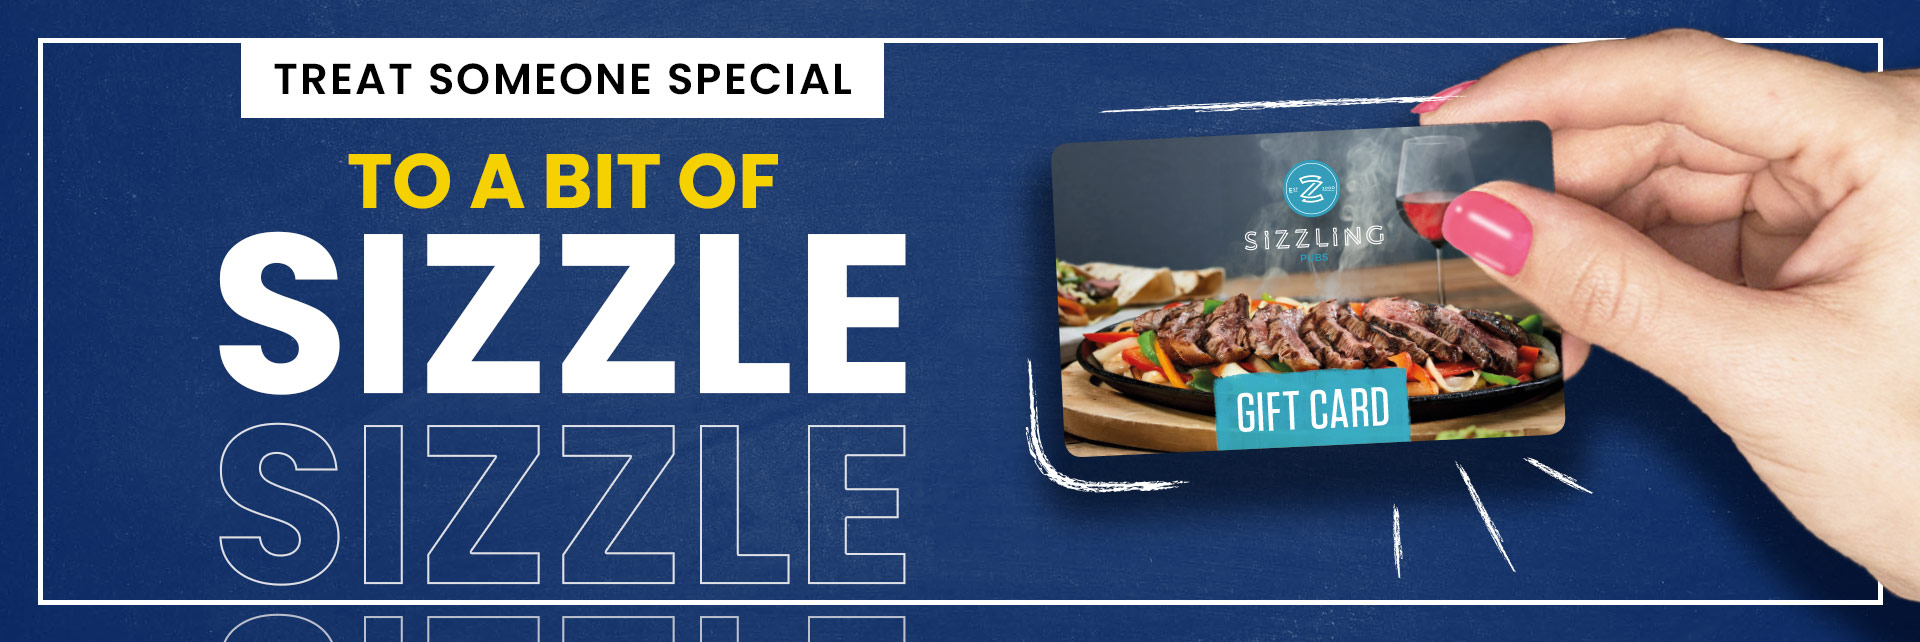 Sizzling Pubs Gift Card at The Crown, Aldridge in Walsall